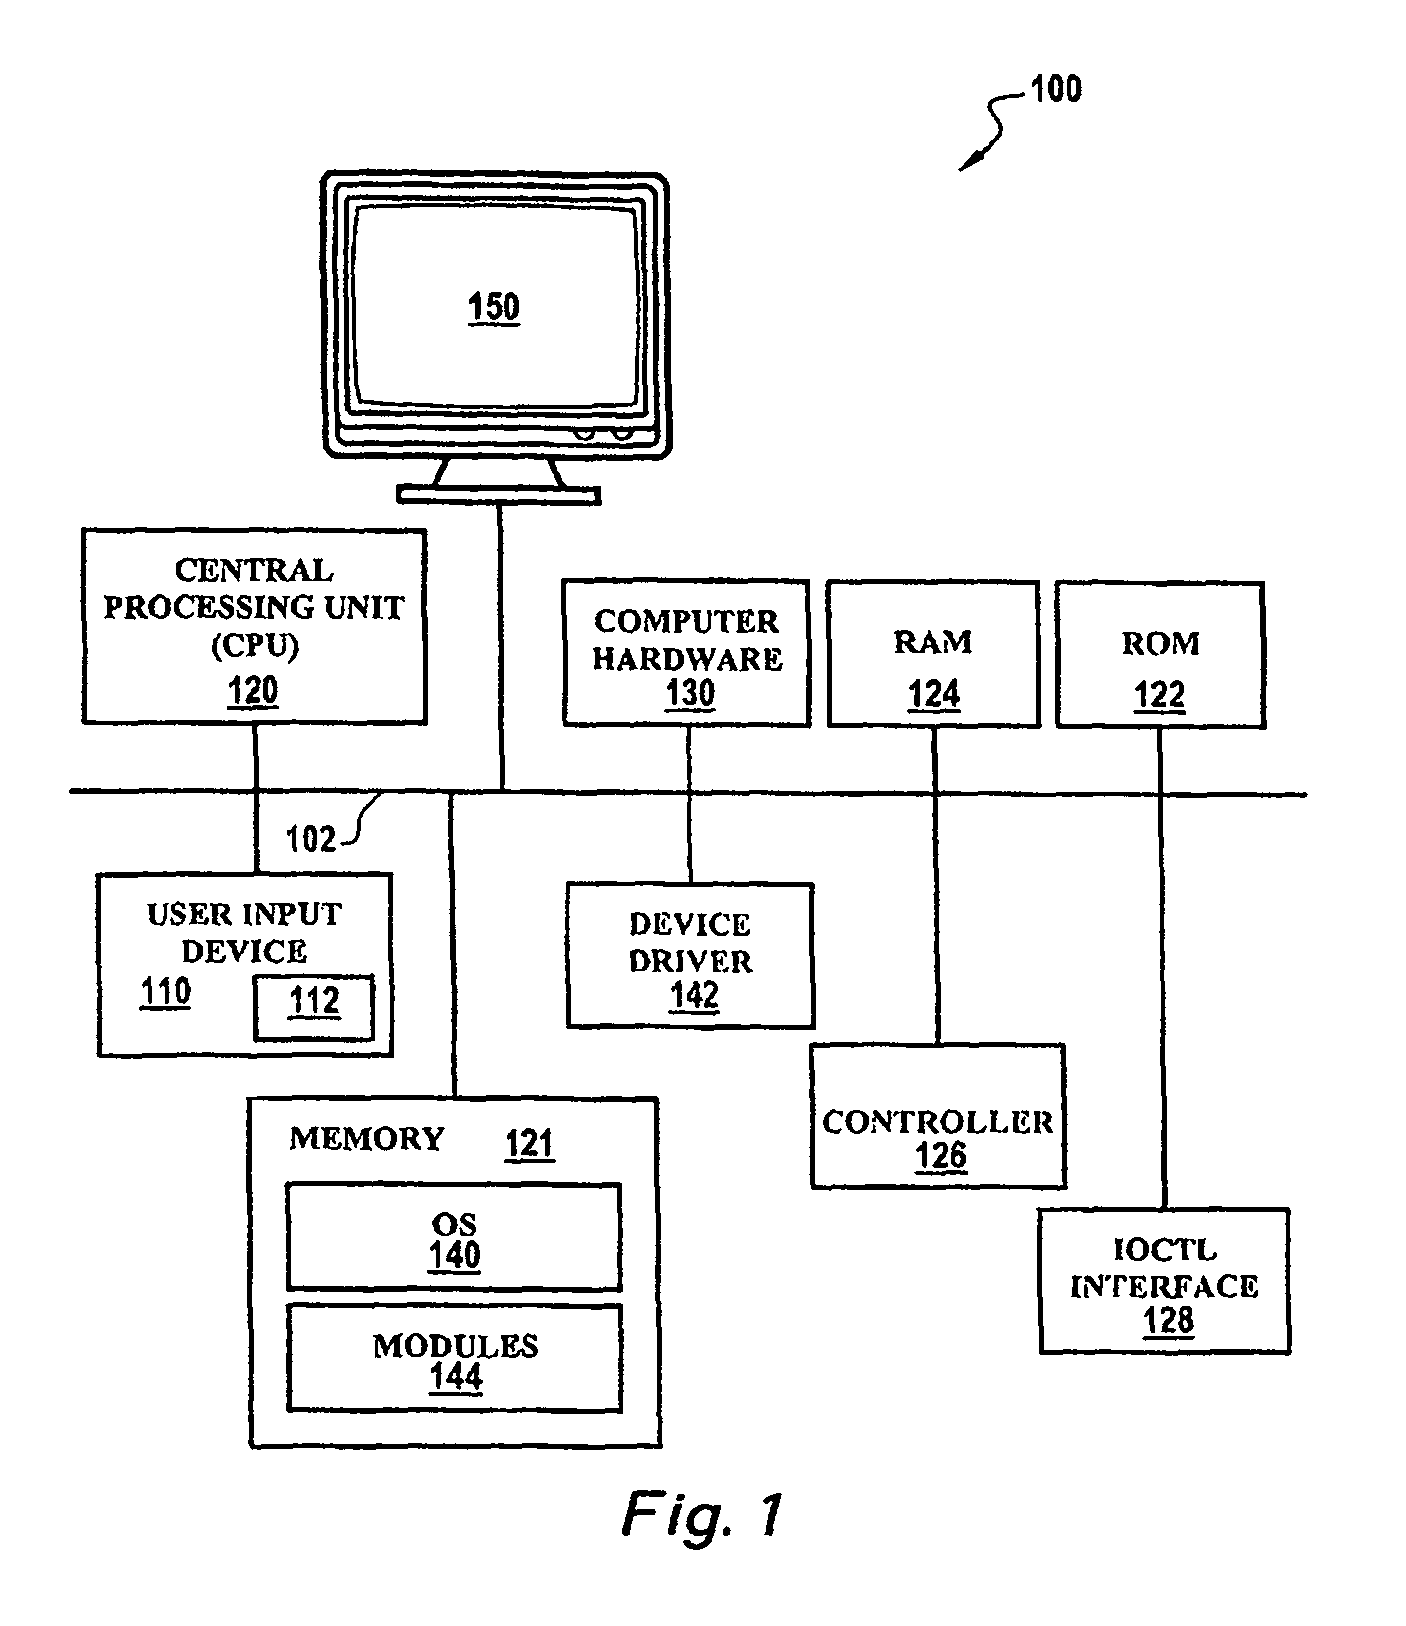 Application programming interface for fusion message passing technology